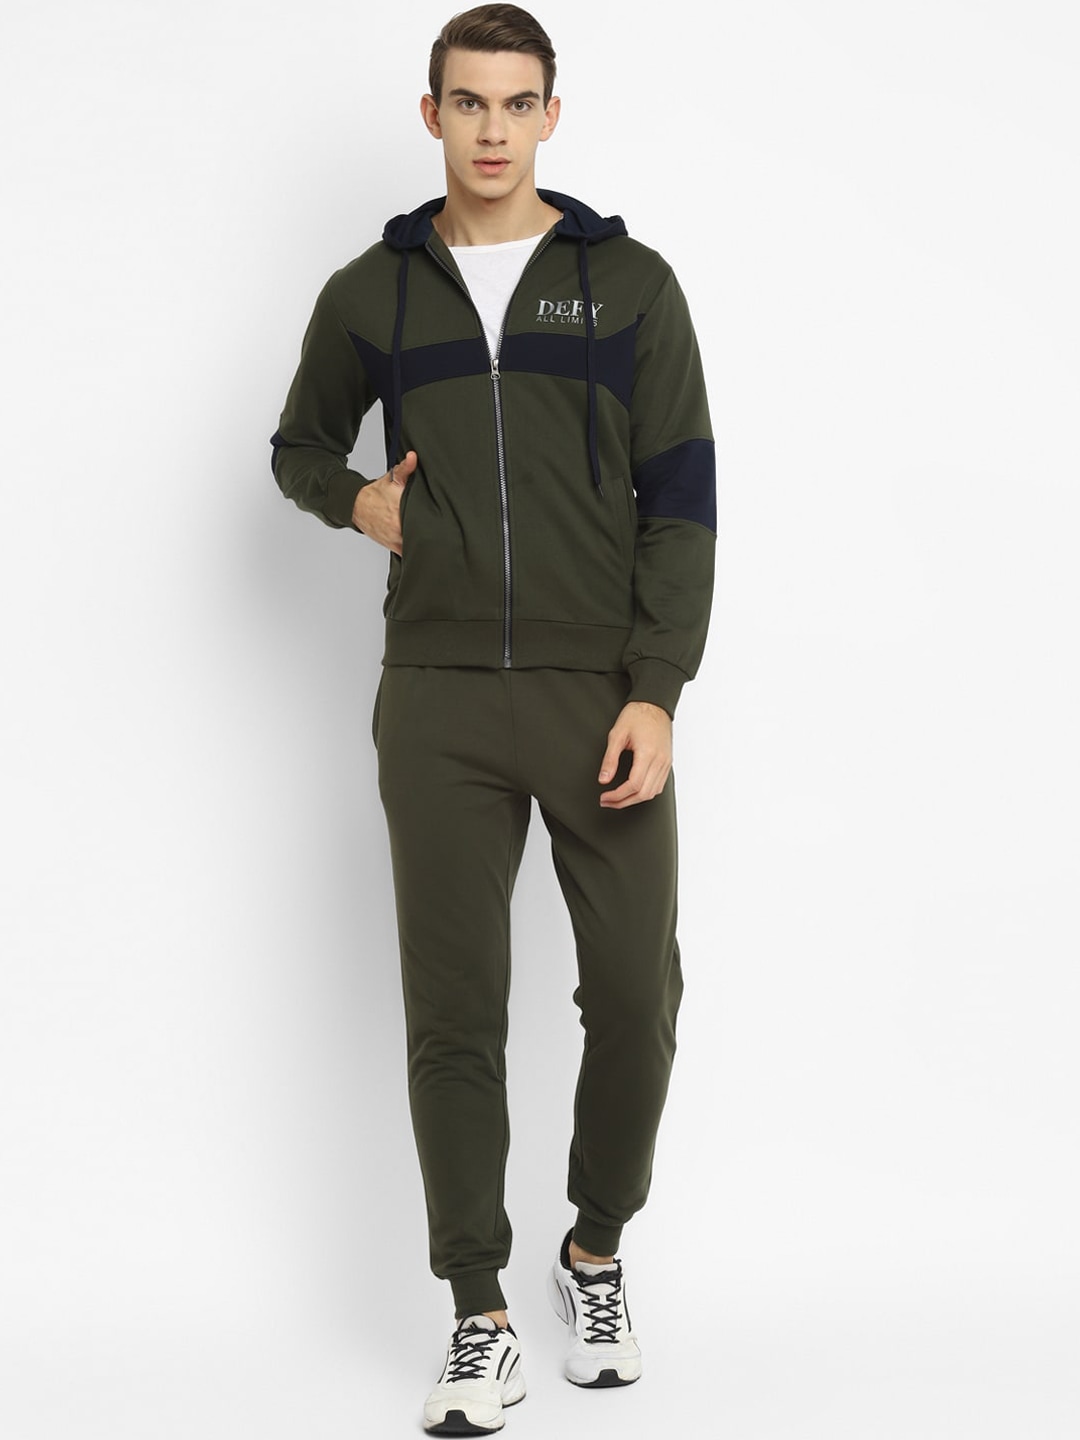 Clothing Tracksuits | OFF LIMITS Men Olive Green & Blue Colourblocked Hooded Tracksuit - XO13180